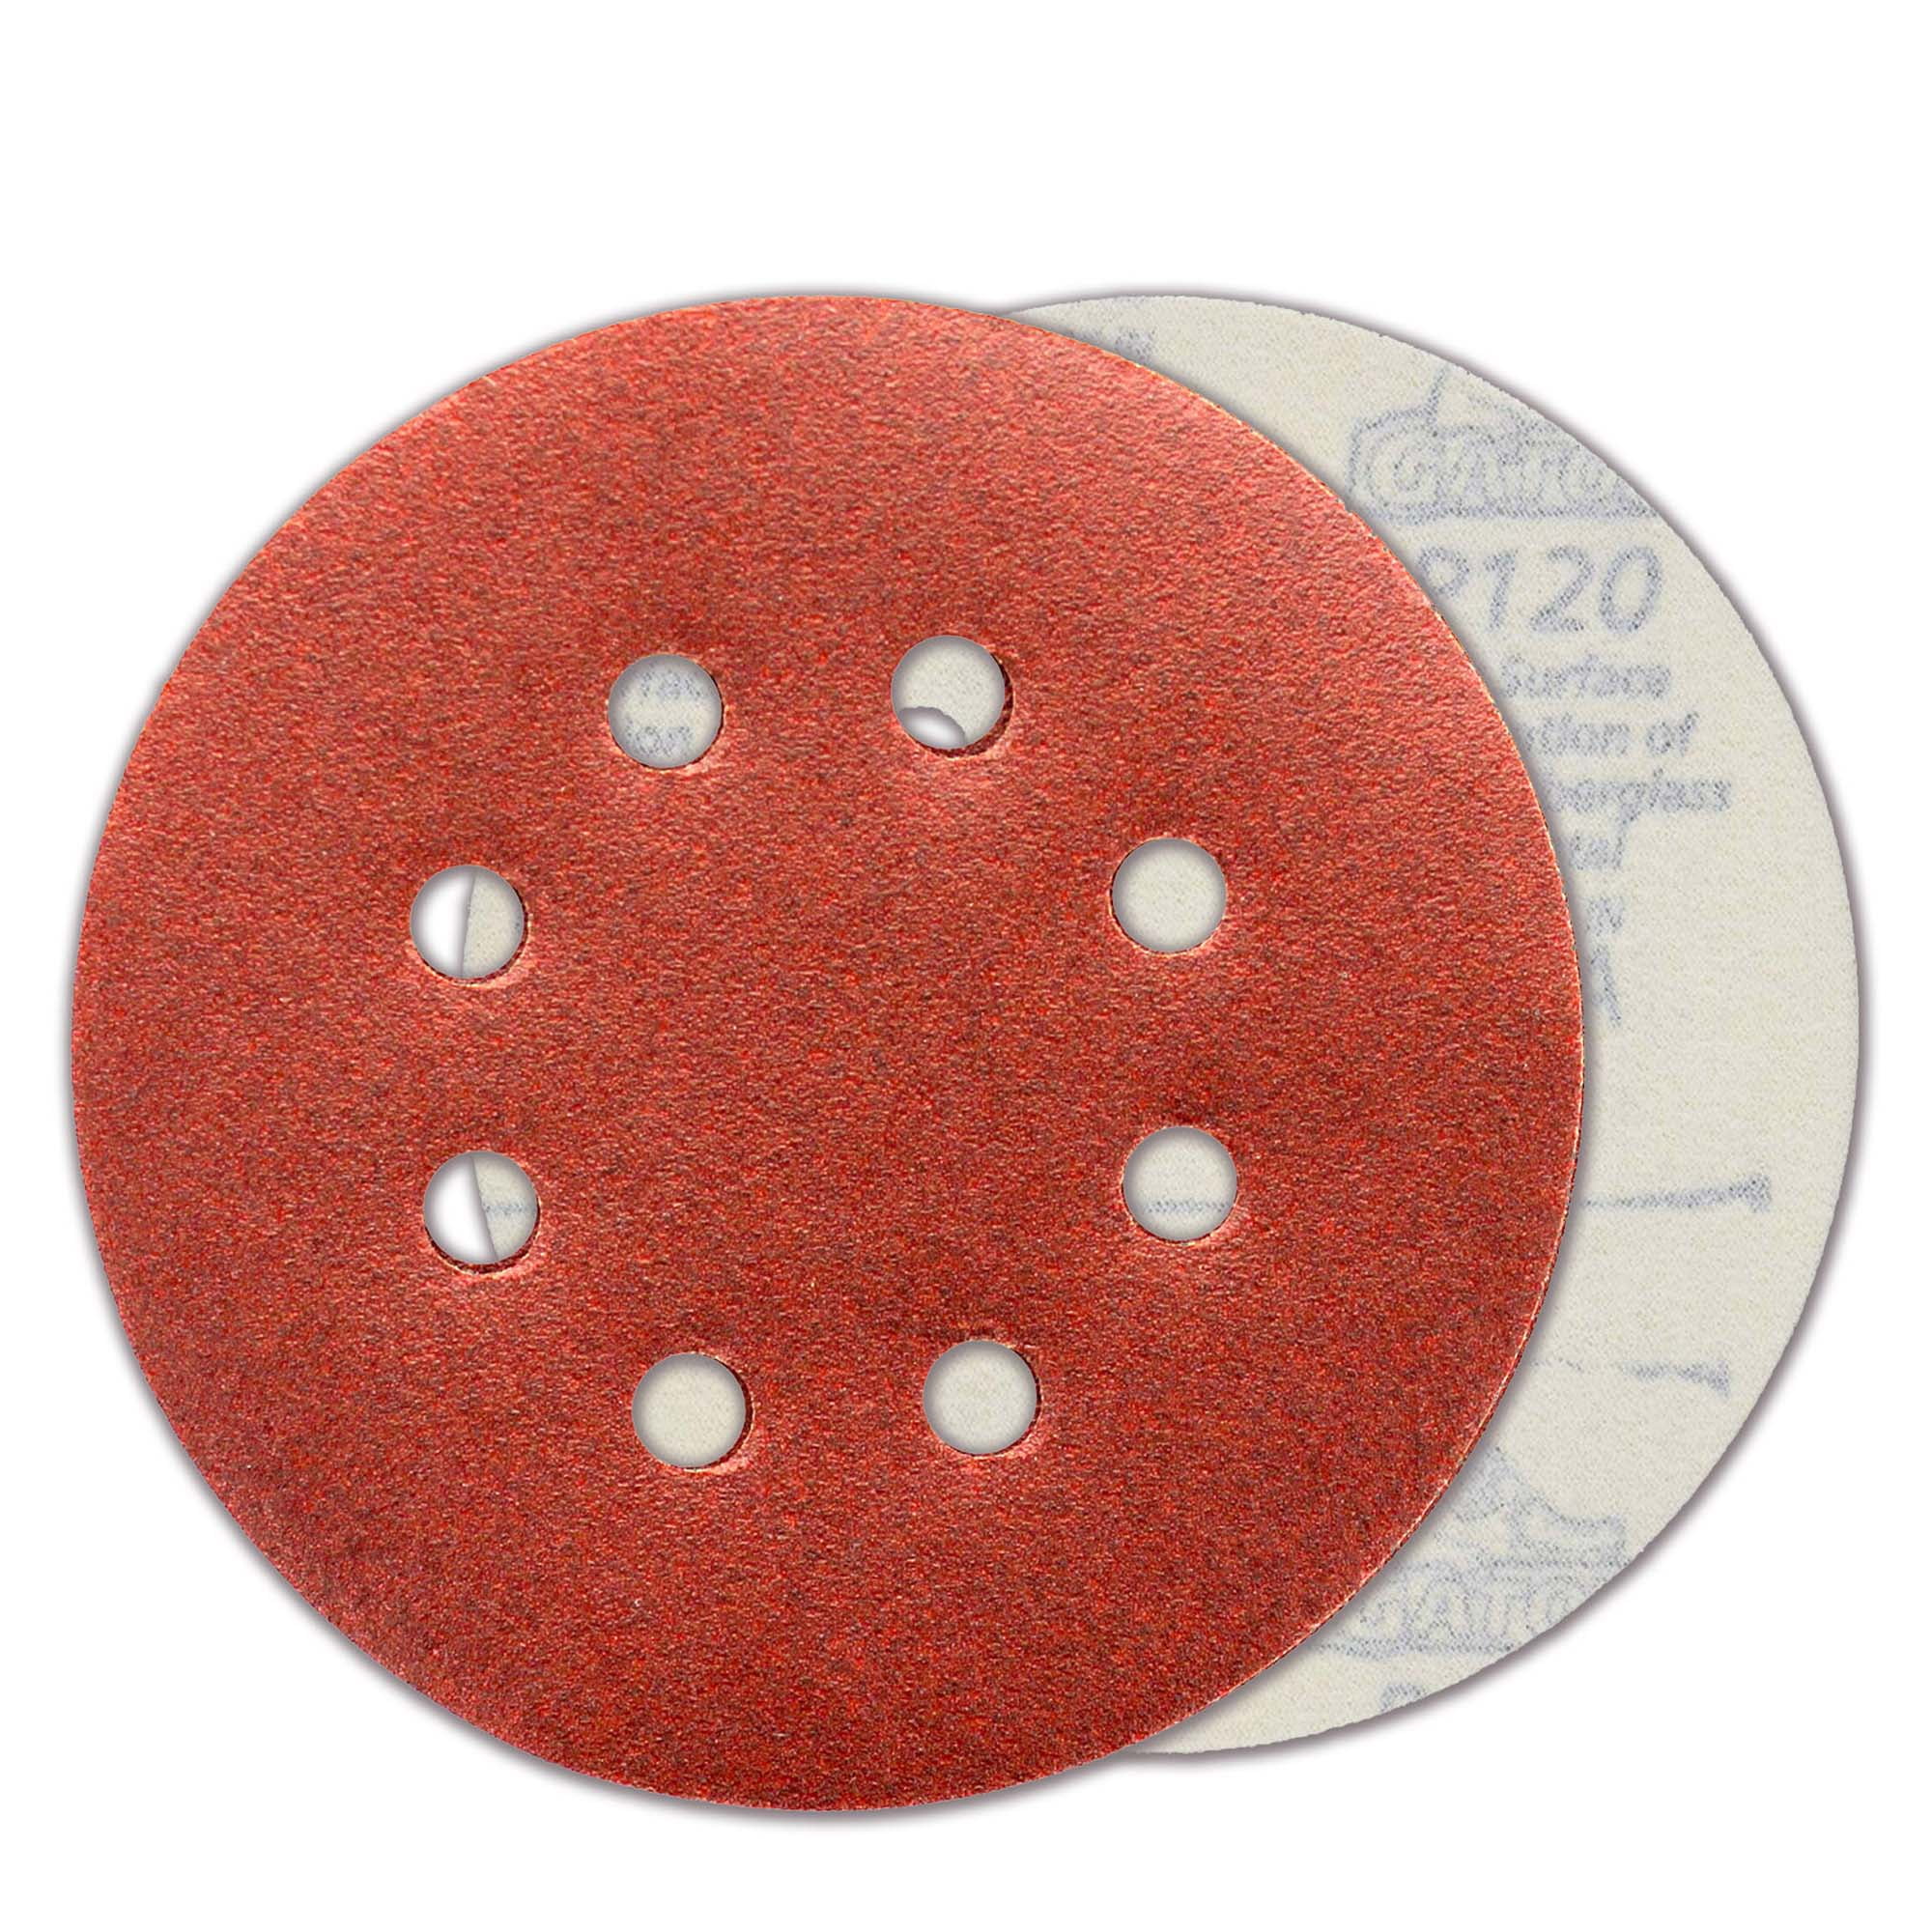 Sticky Backed Sanding Discs 6/'/' Sand Paper Pad 40-800 Grit 150mm Self Adhesive